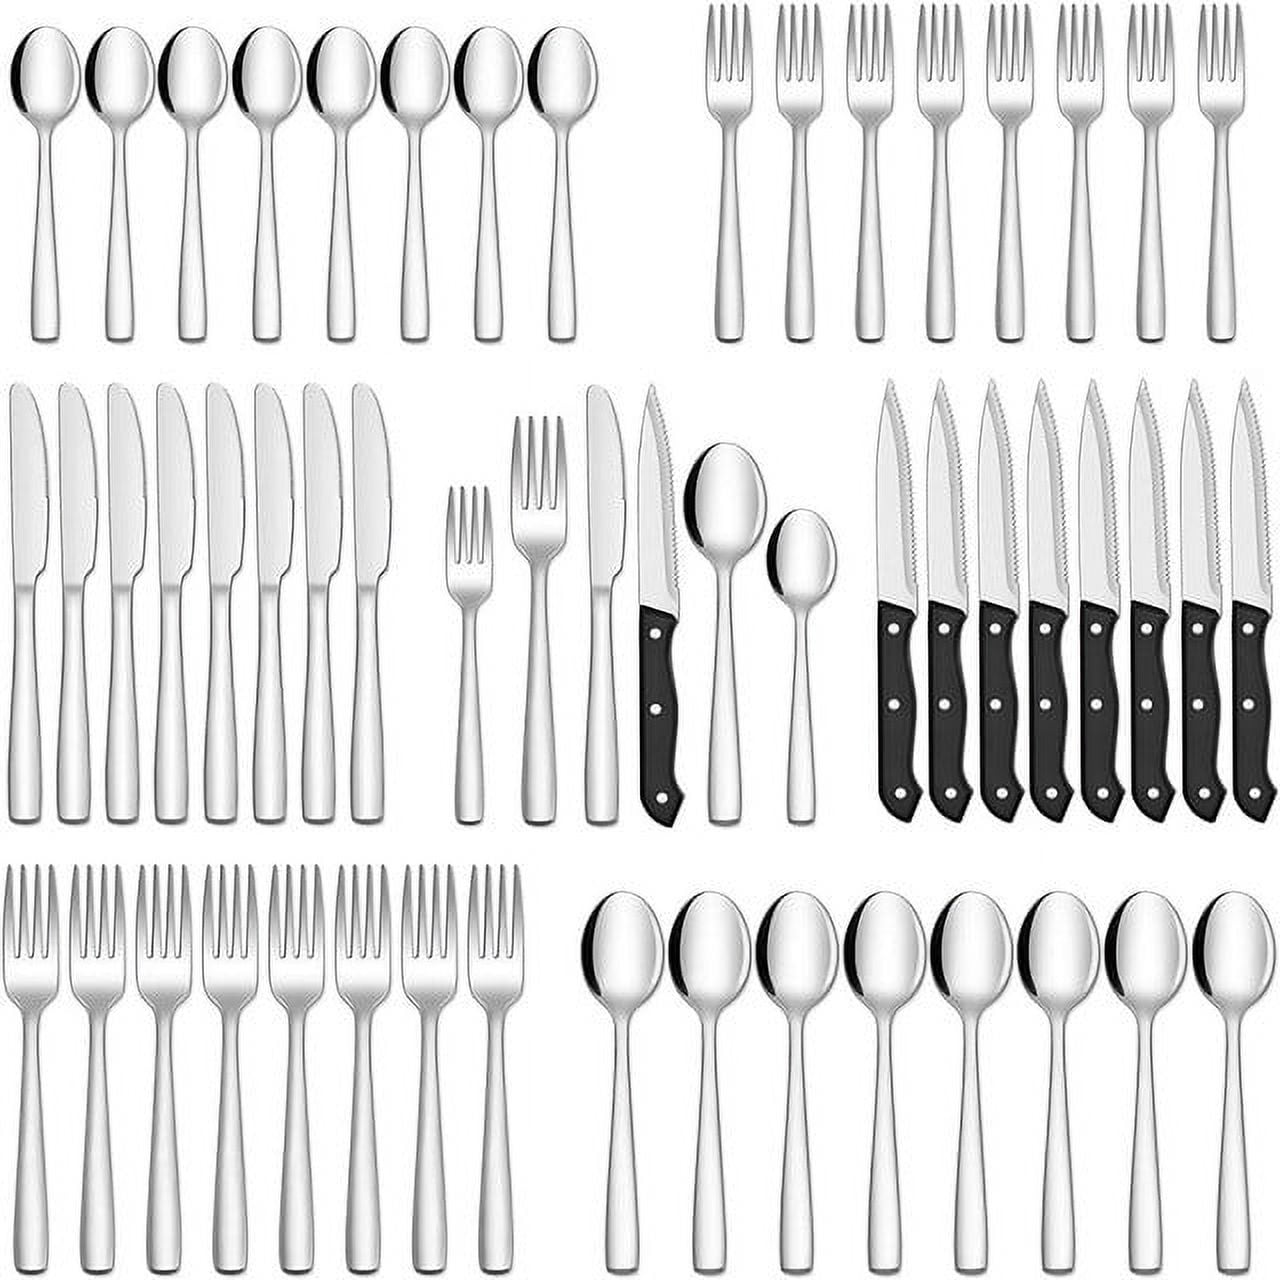 LIANYU 48-Piece Black Silverware Set with Steak Knives and Organizer,  Stainless Steel Flatware Cutlery Set for 8, Tableware Eating Utensils Set  for